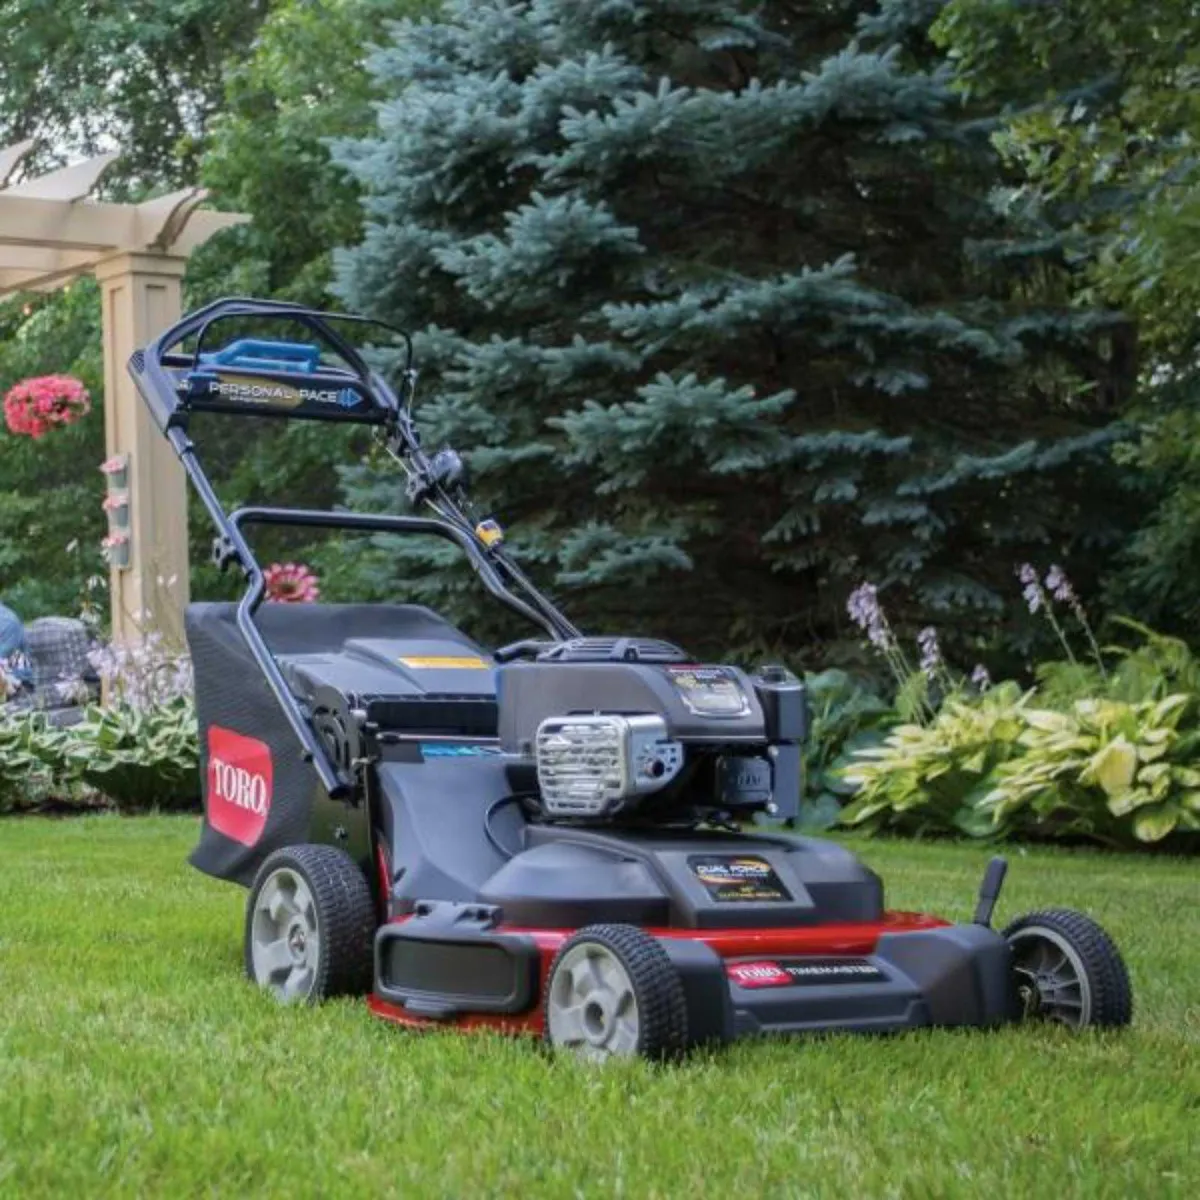 Toro Lawnmowers - Free delivery